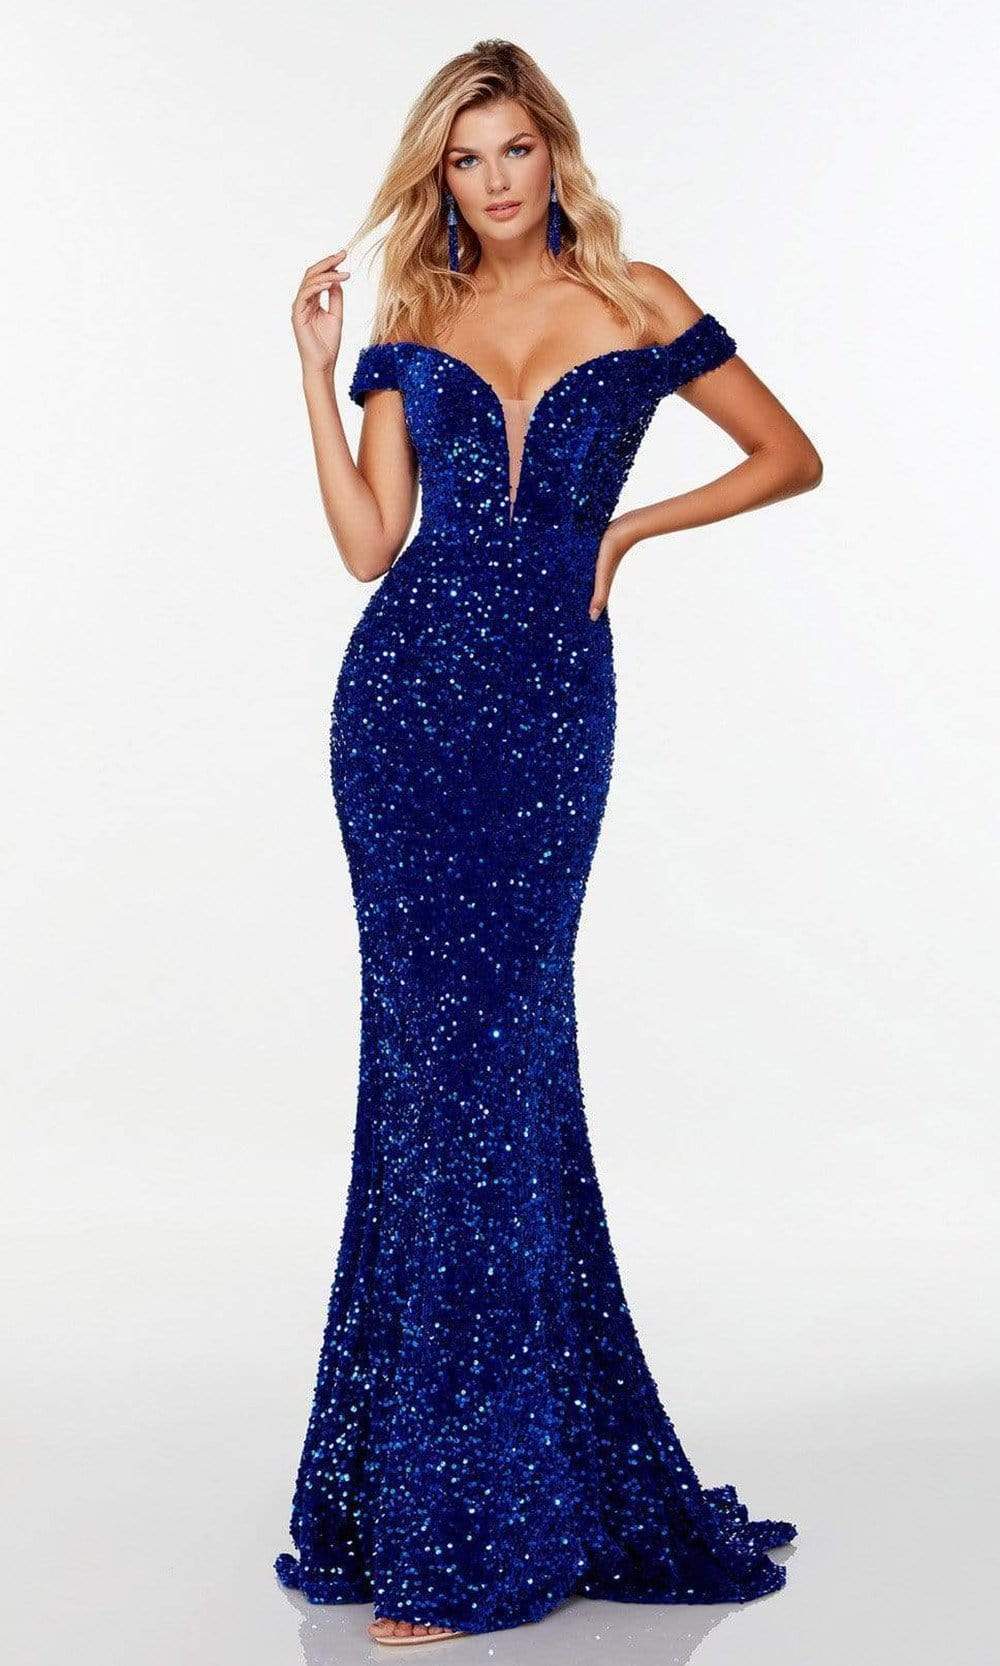 Alyce Paris - 61187 Off Shoulder Sheath Gown Special Occasion Dress 000 / Royal